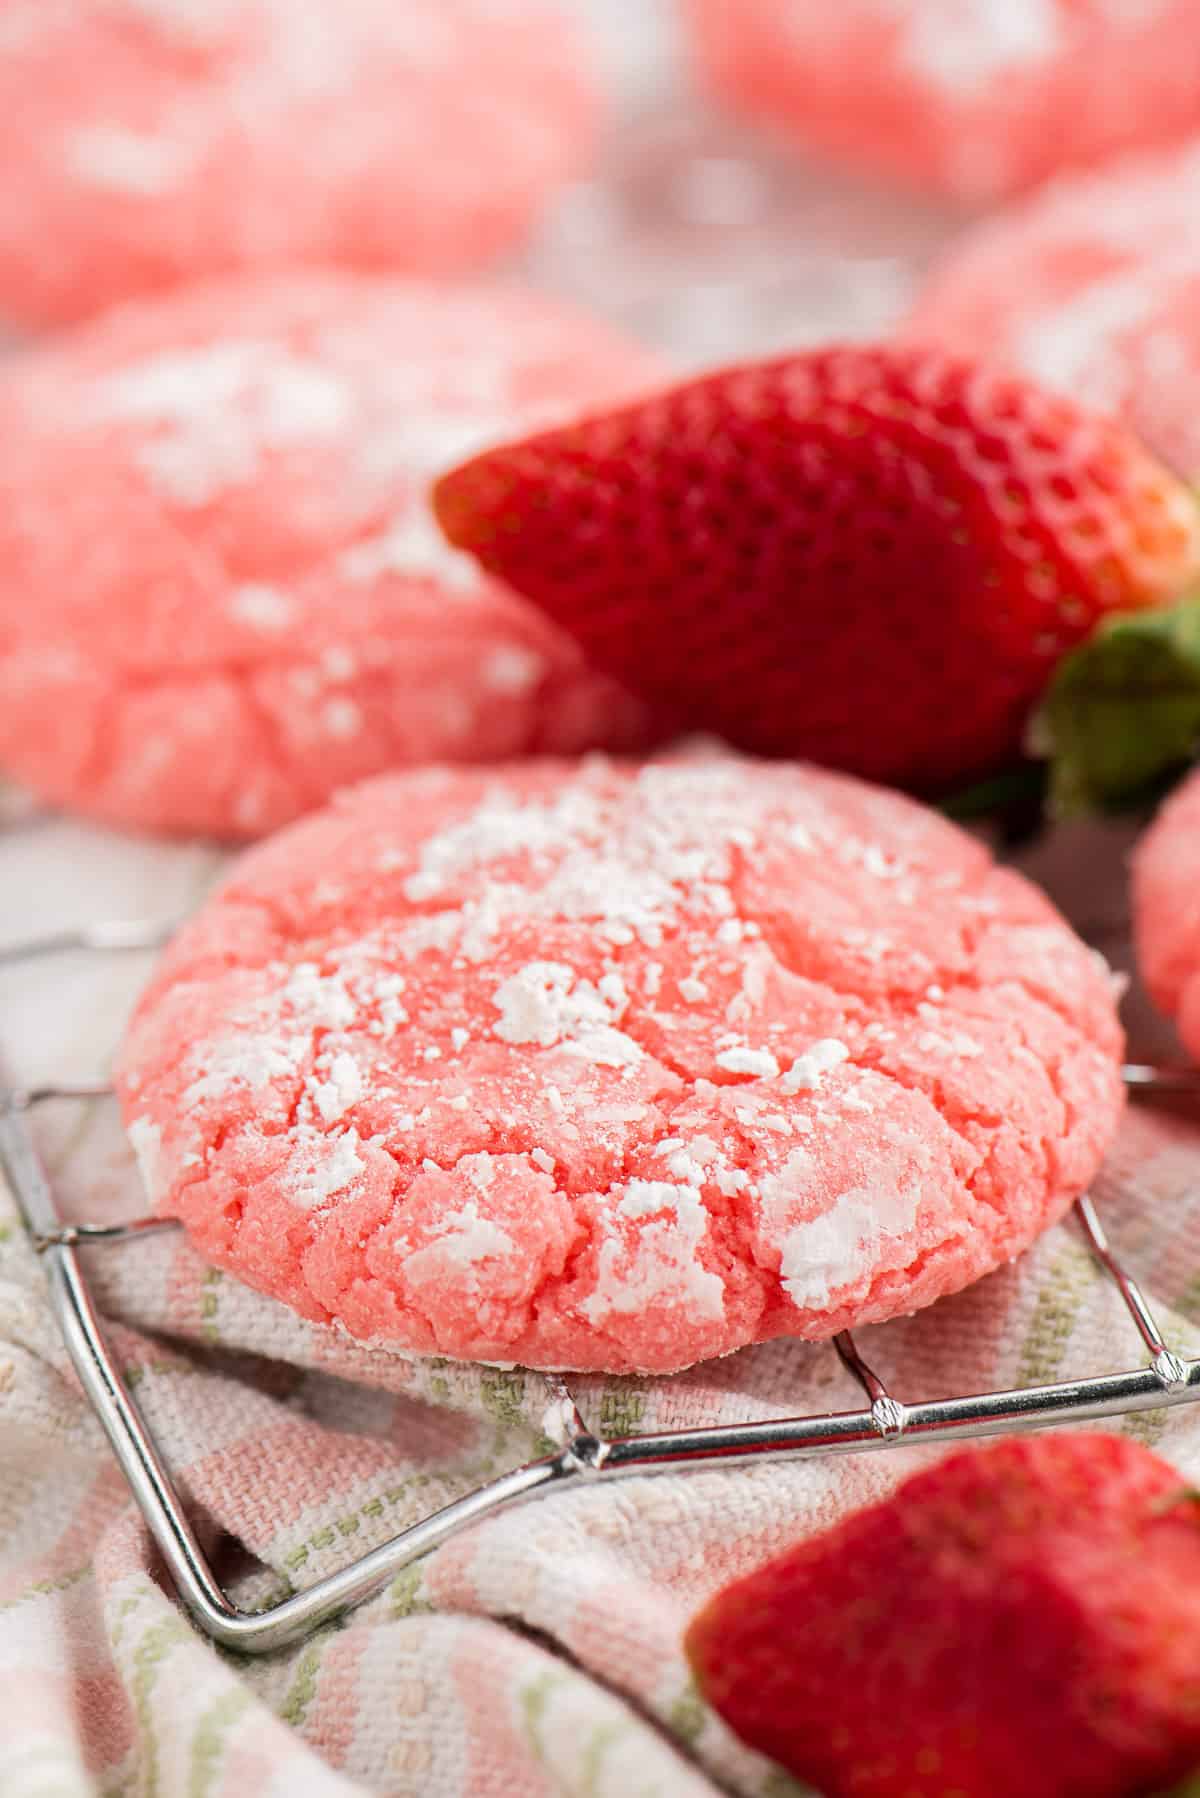 A strawberry cake mix cookie cooling on a wire rack.